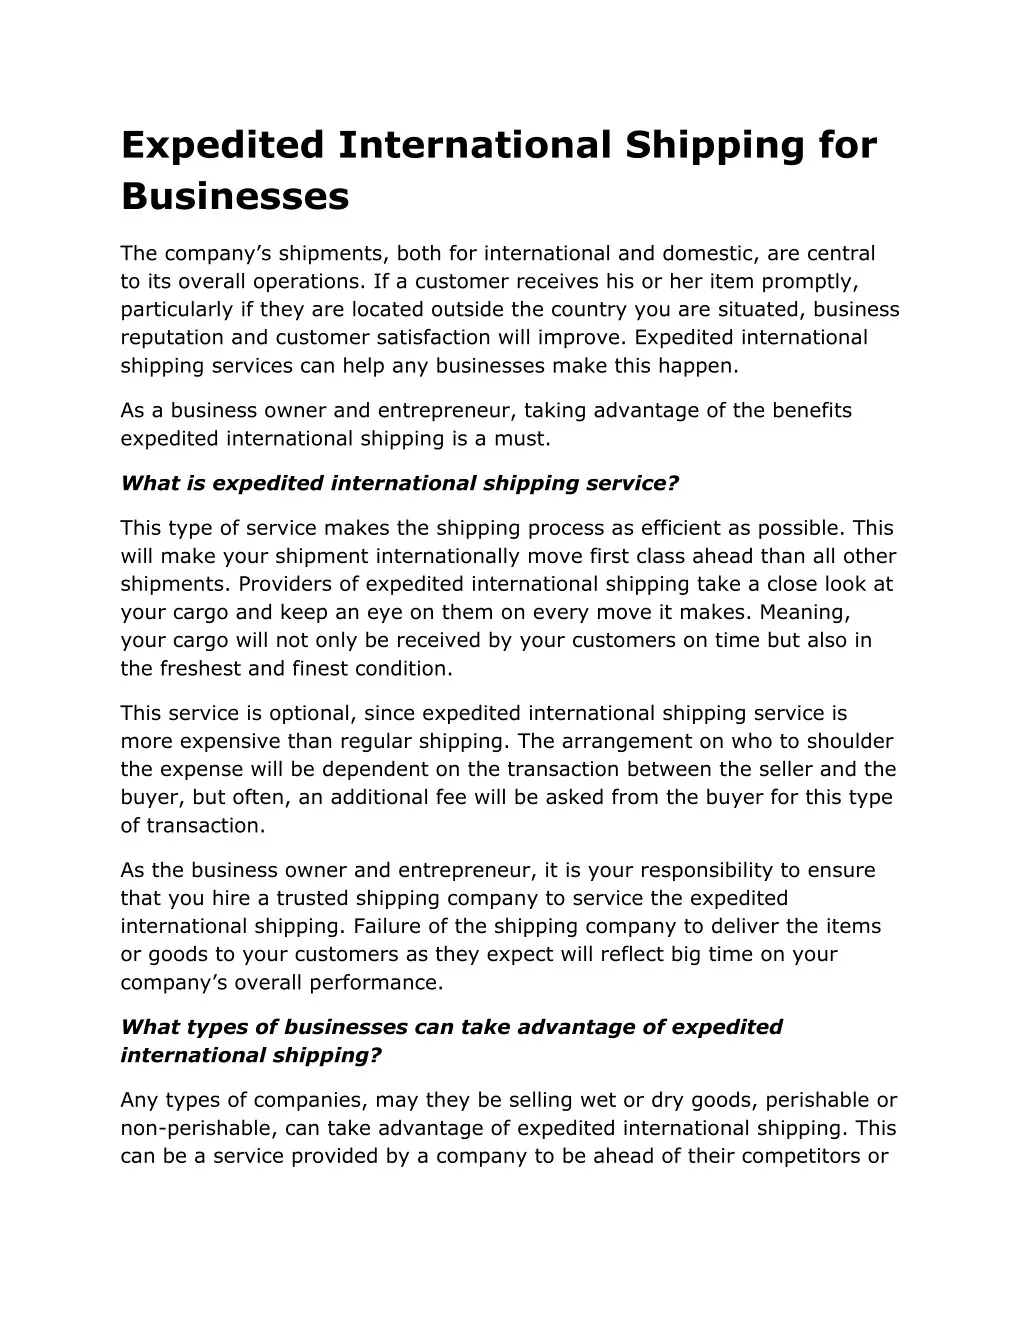 expedited international shipping for businesses